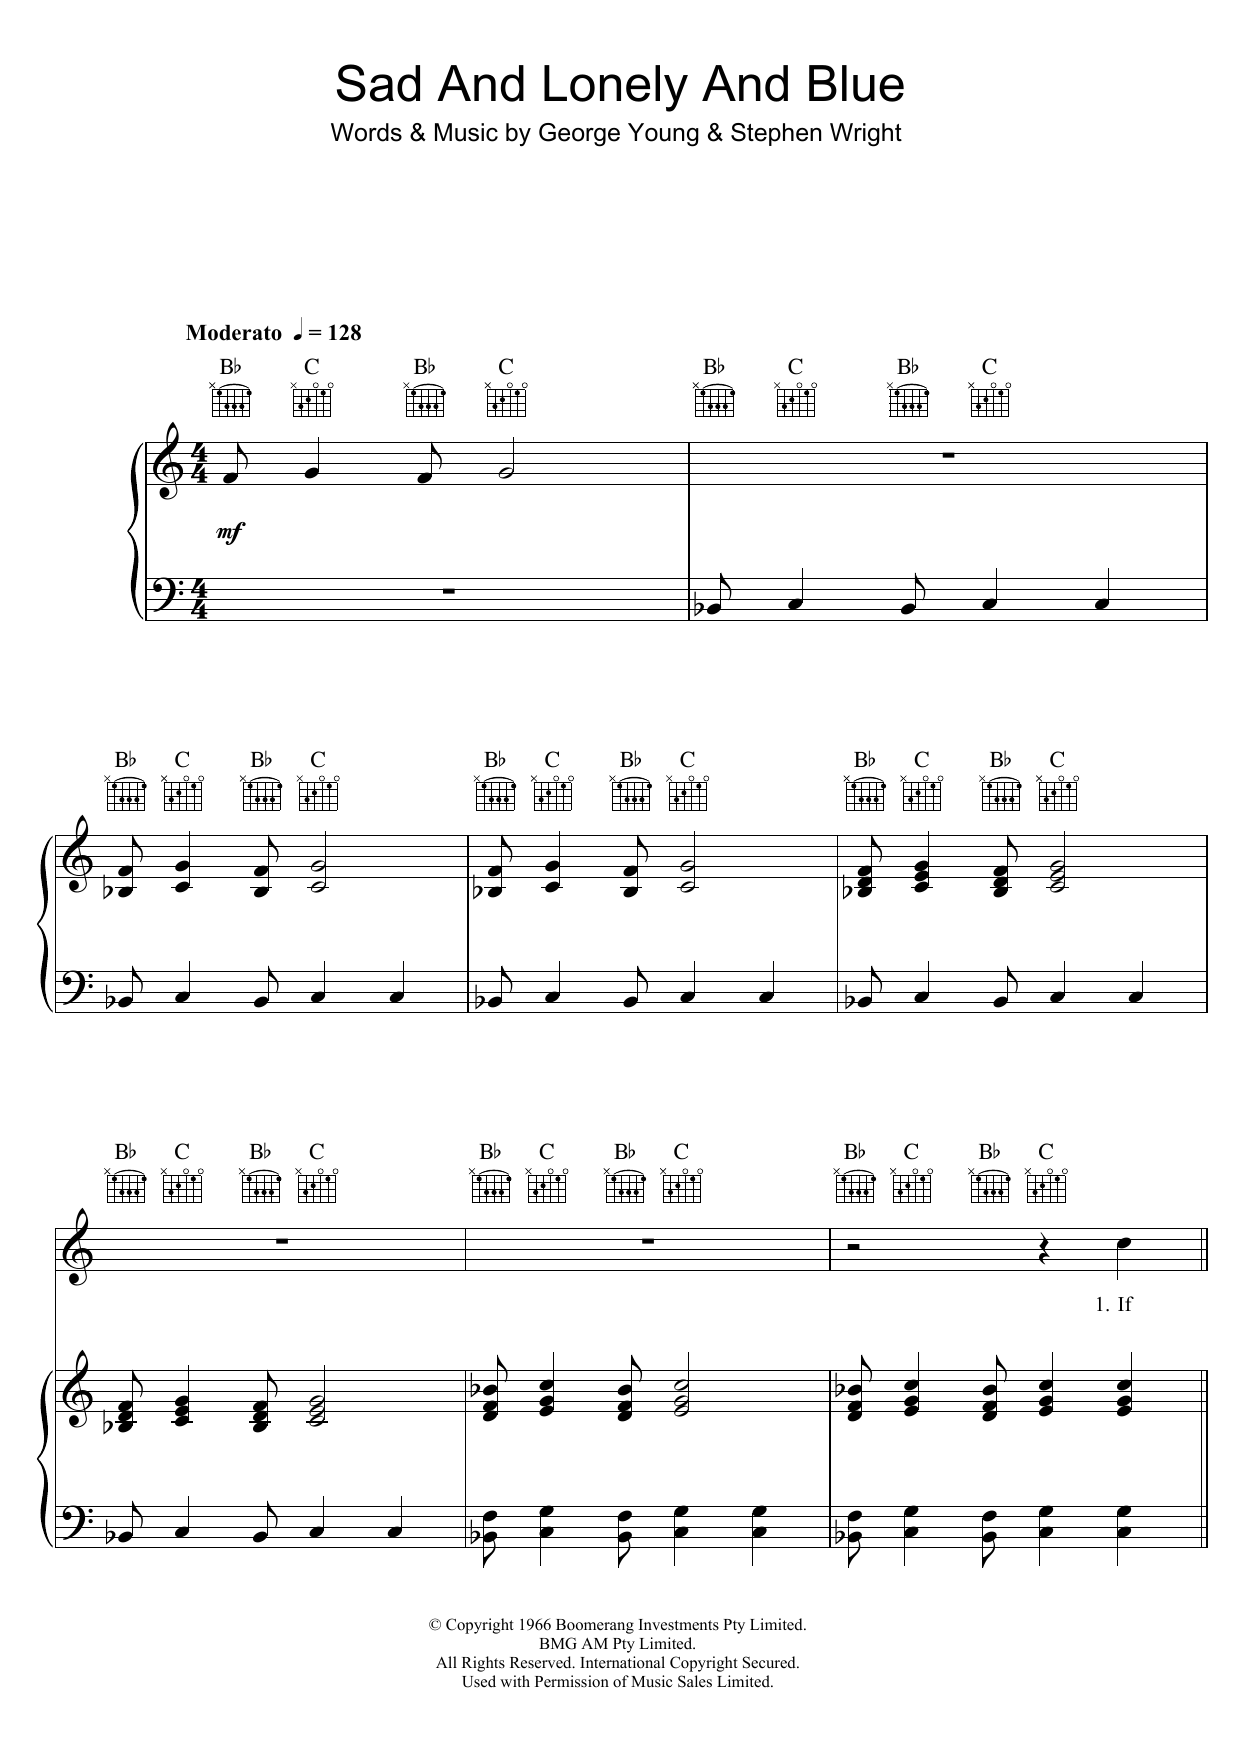 Download The Easybeats Sad And Lonely And Blue Sheet Music